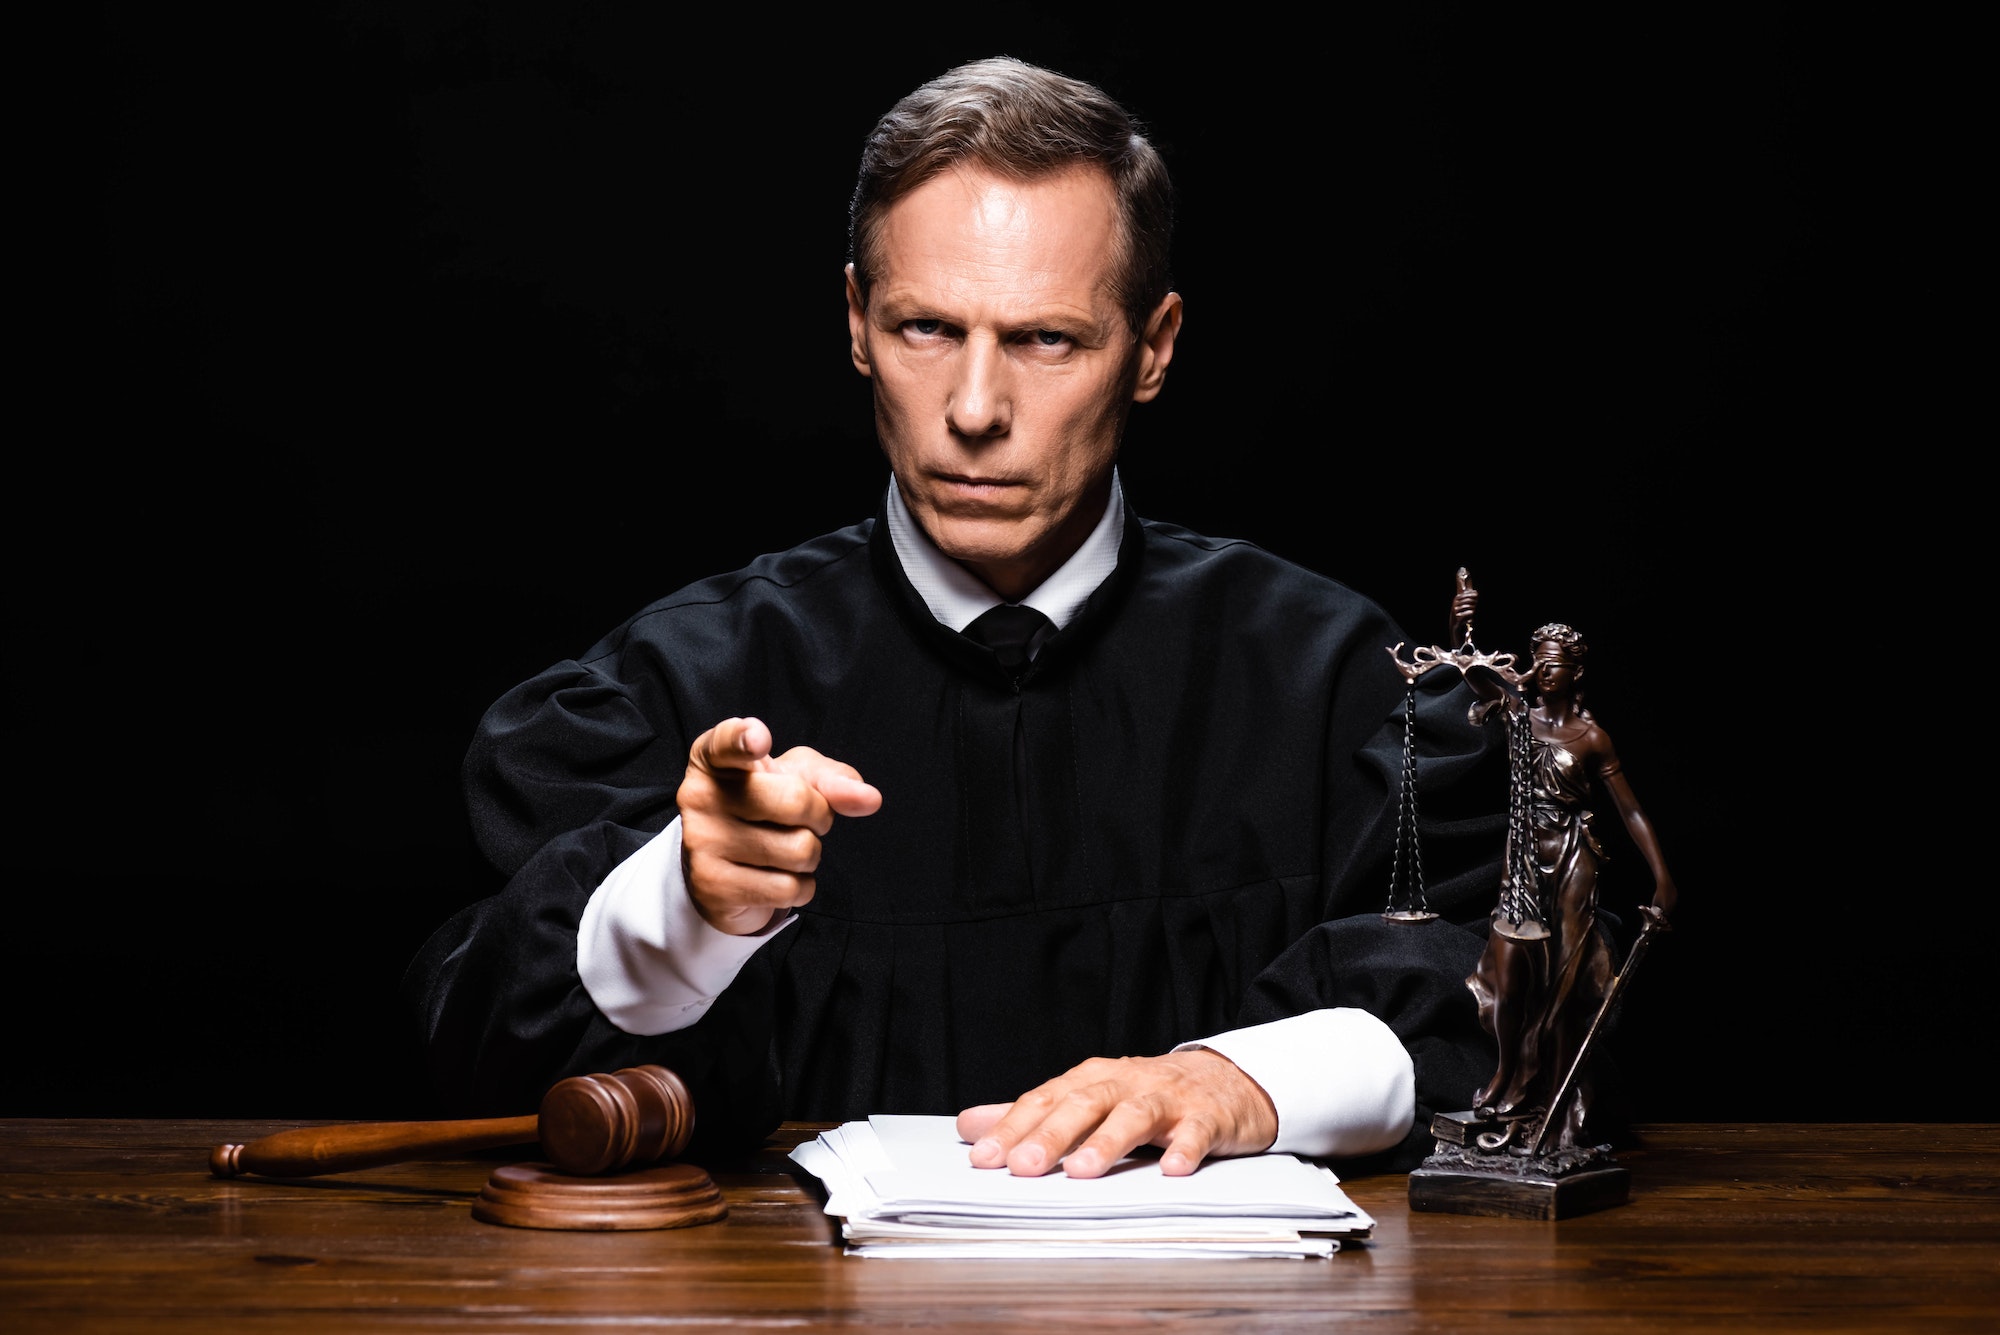 judge in judicial robe sitting at table and pointing with finger isolated on black